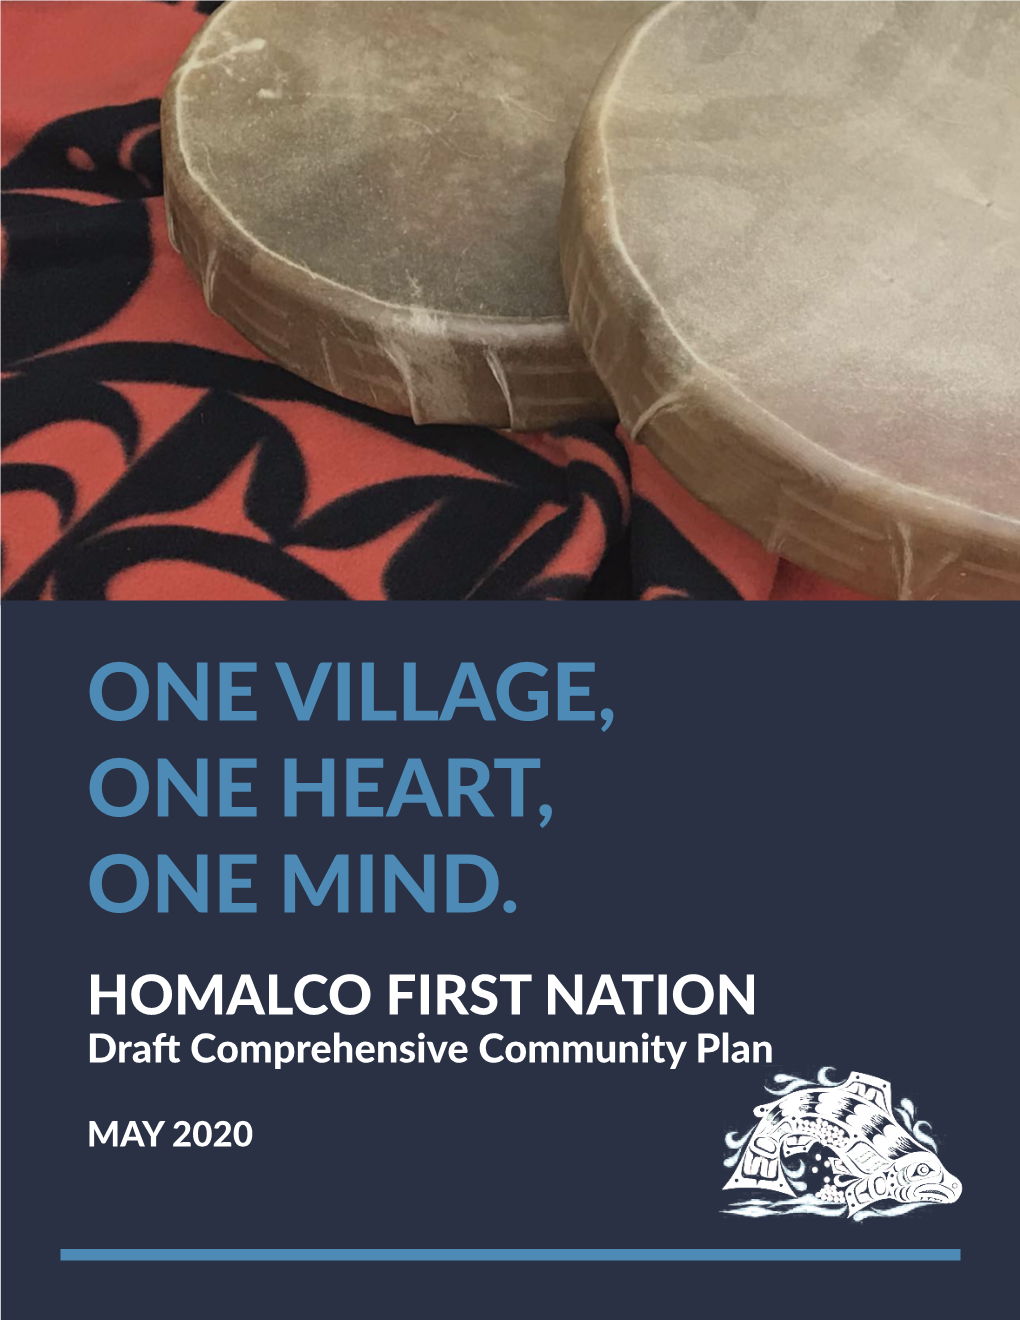 ONE VILLAGE, ONE HEART, ONE MIND. HOMALCO FIRST NATION Draft Comprehensive Community Plan